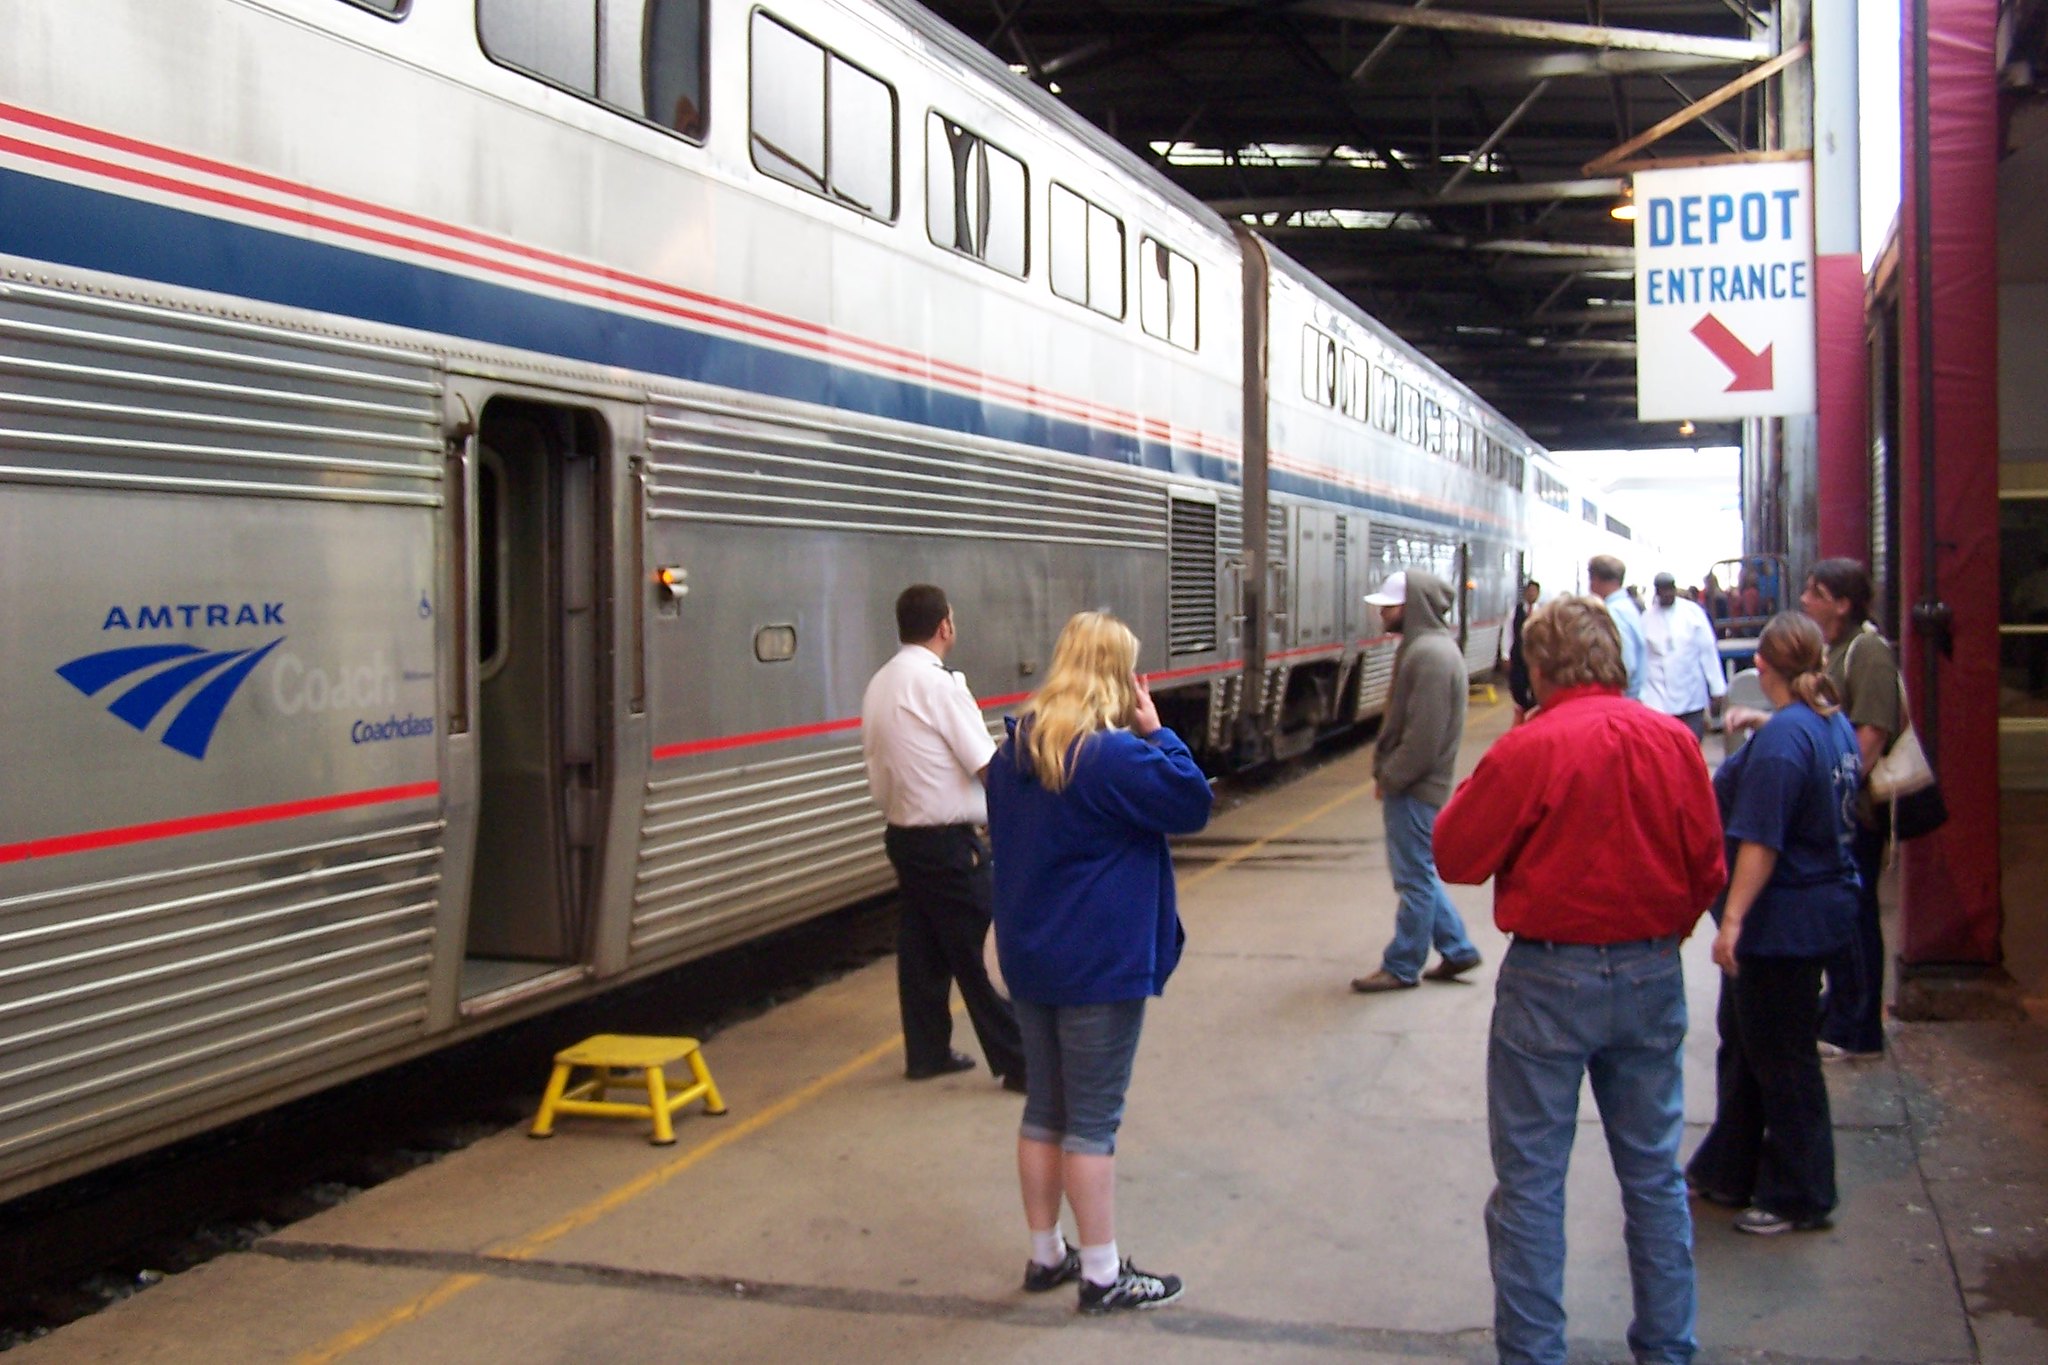 Wisconsin to receive $2.5M to study feasibility of passenger rail expansion